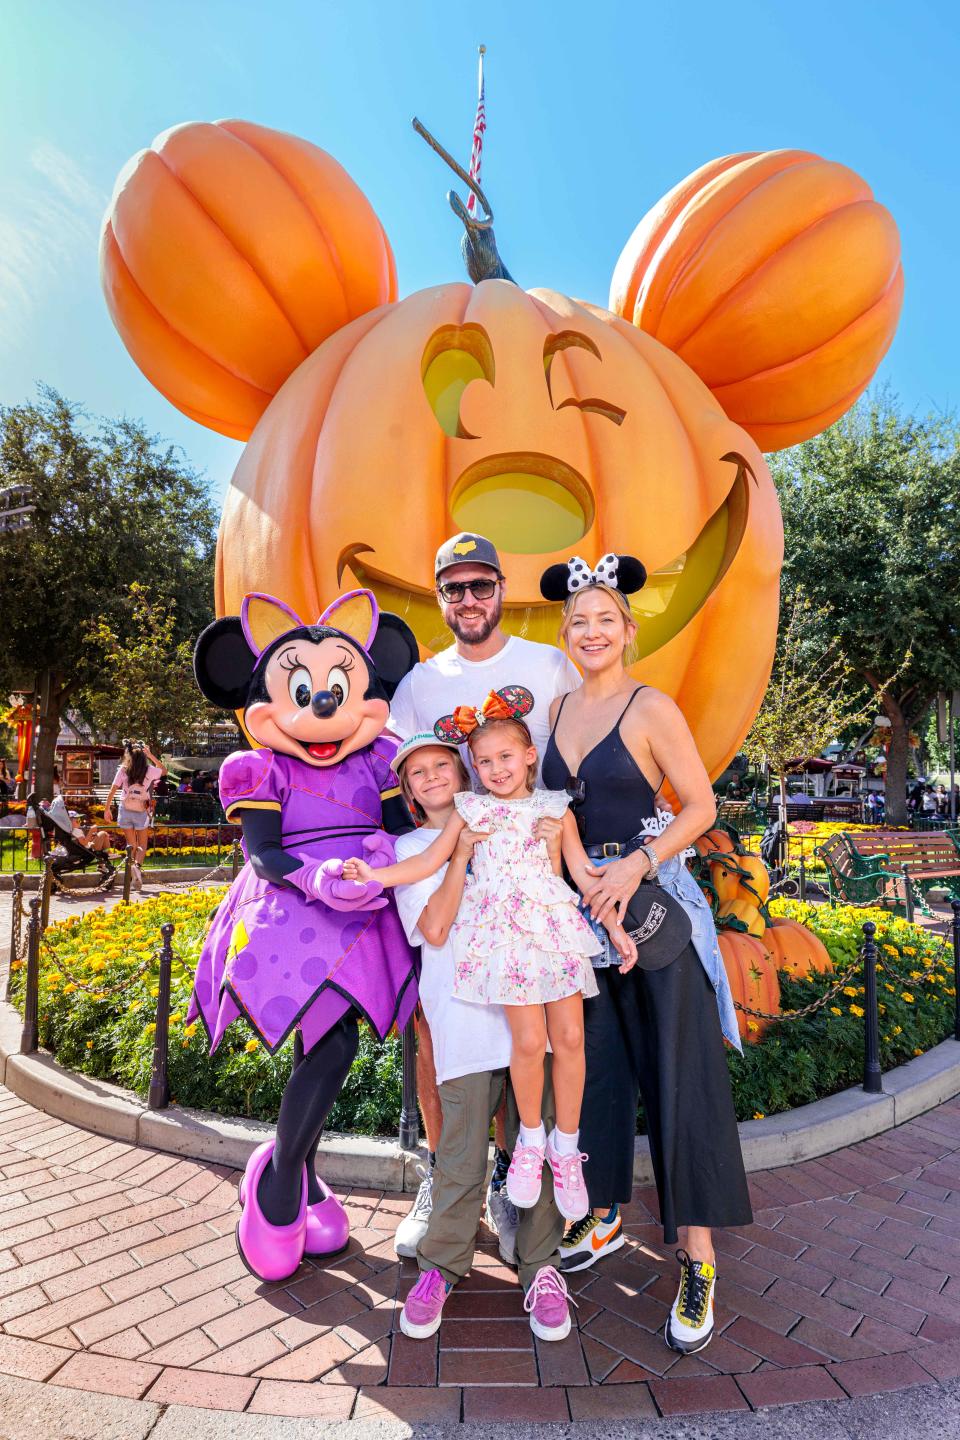 ANAHEIM, CA - SEPTEMBER 26: In this handout image provided by Disneyland Resort, actress Kate Hudson and her family celebrate her daughter Rani Rose's birthday with Minnie Mouse during Halloween Time at Disneyland Park on September 26, 2022 in Anaheim, California. Halloween Time casts a spell throughout Disneyland Resort with family-friendly experiences, including Haunted Mansion Holiday, Mickey Mouse pumpkin photos, favorite Cars Land characters dressed up in festive car-stumes and so much more through Oct. 31. (Photo by Sean Teegarden/Disneyland Resort via Getty Images)